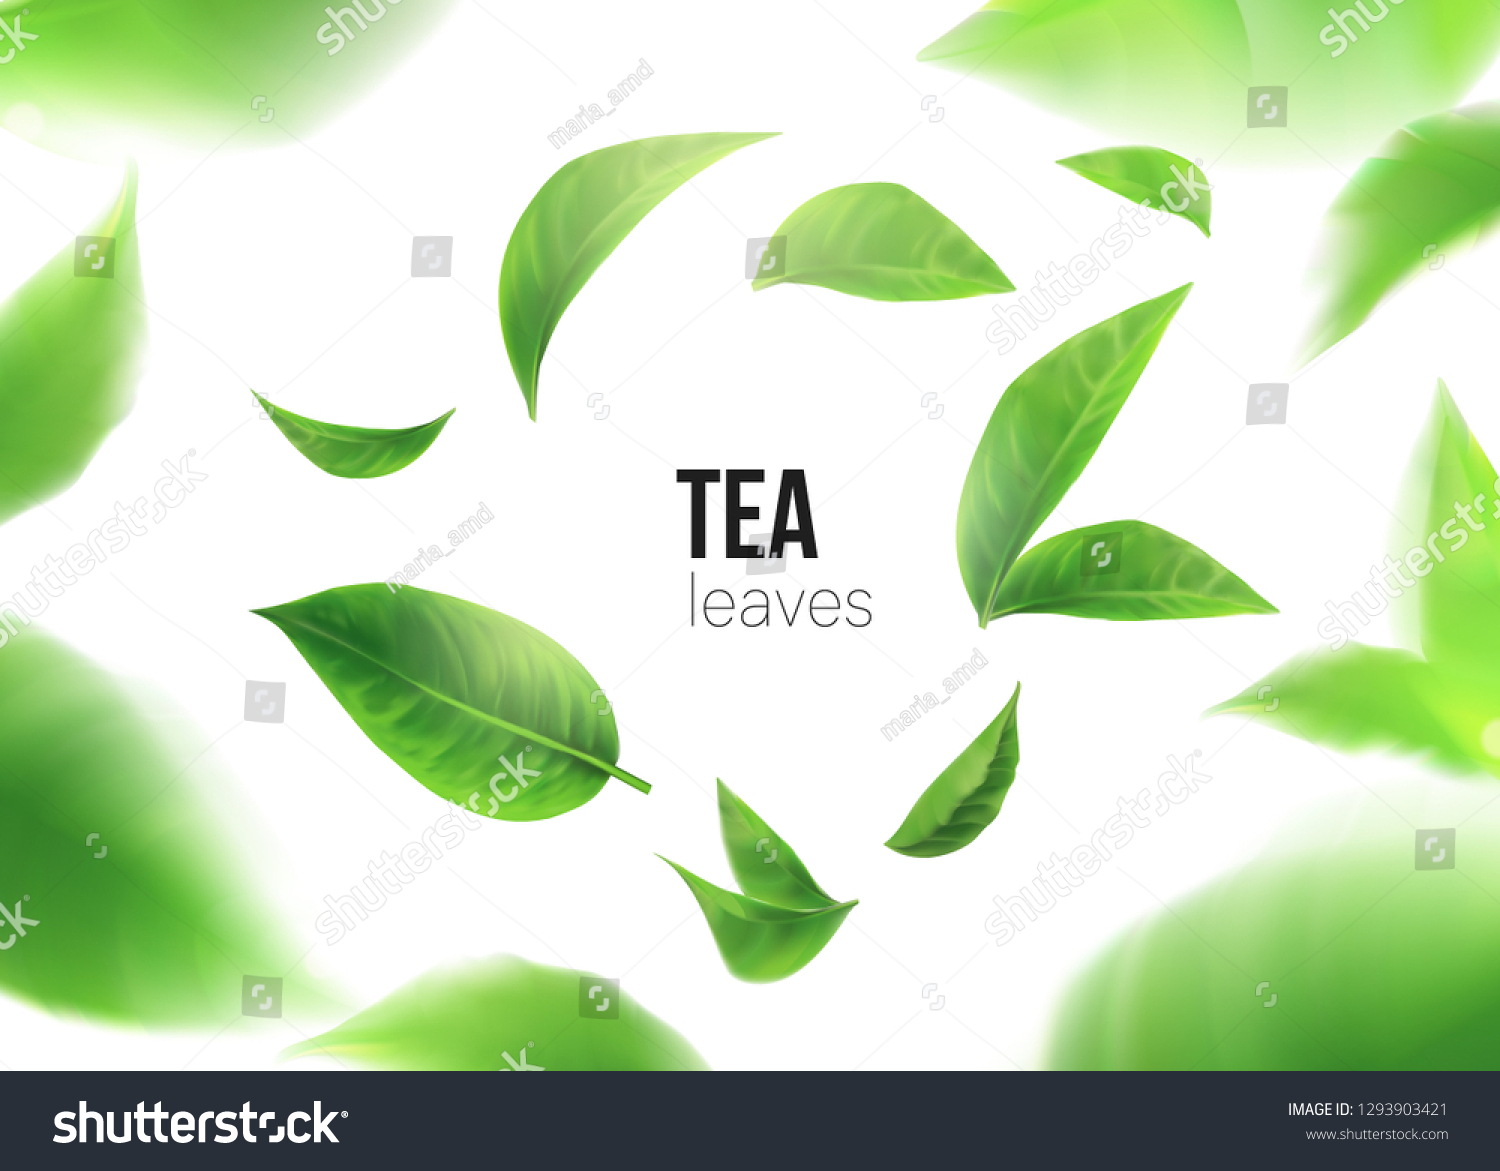 Green tea. Tea leaves whirl in the air.  Element for design, advertising, packaging of tea products white background 3d illustration #1293903421